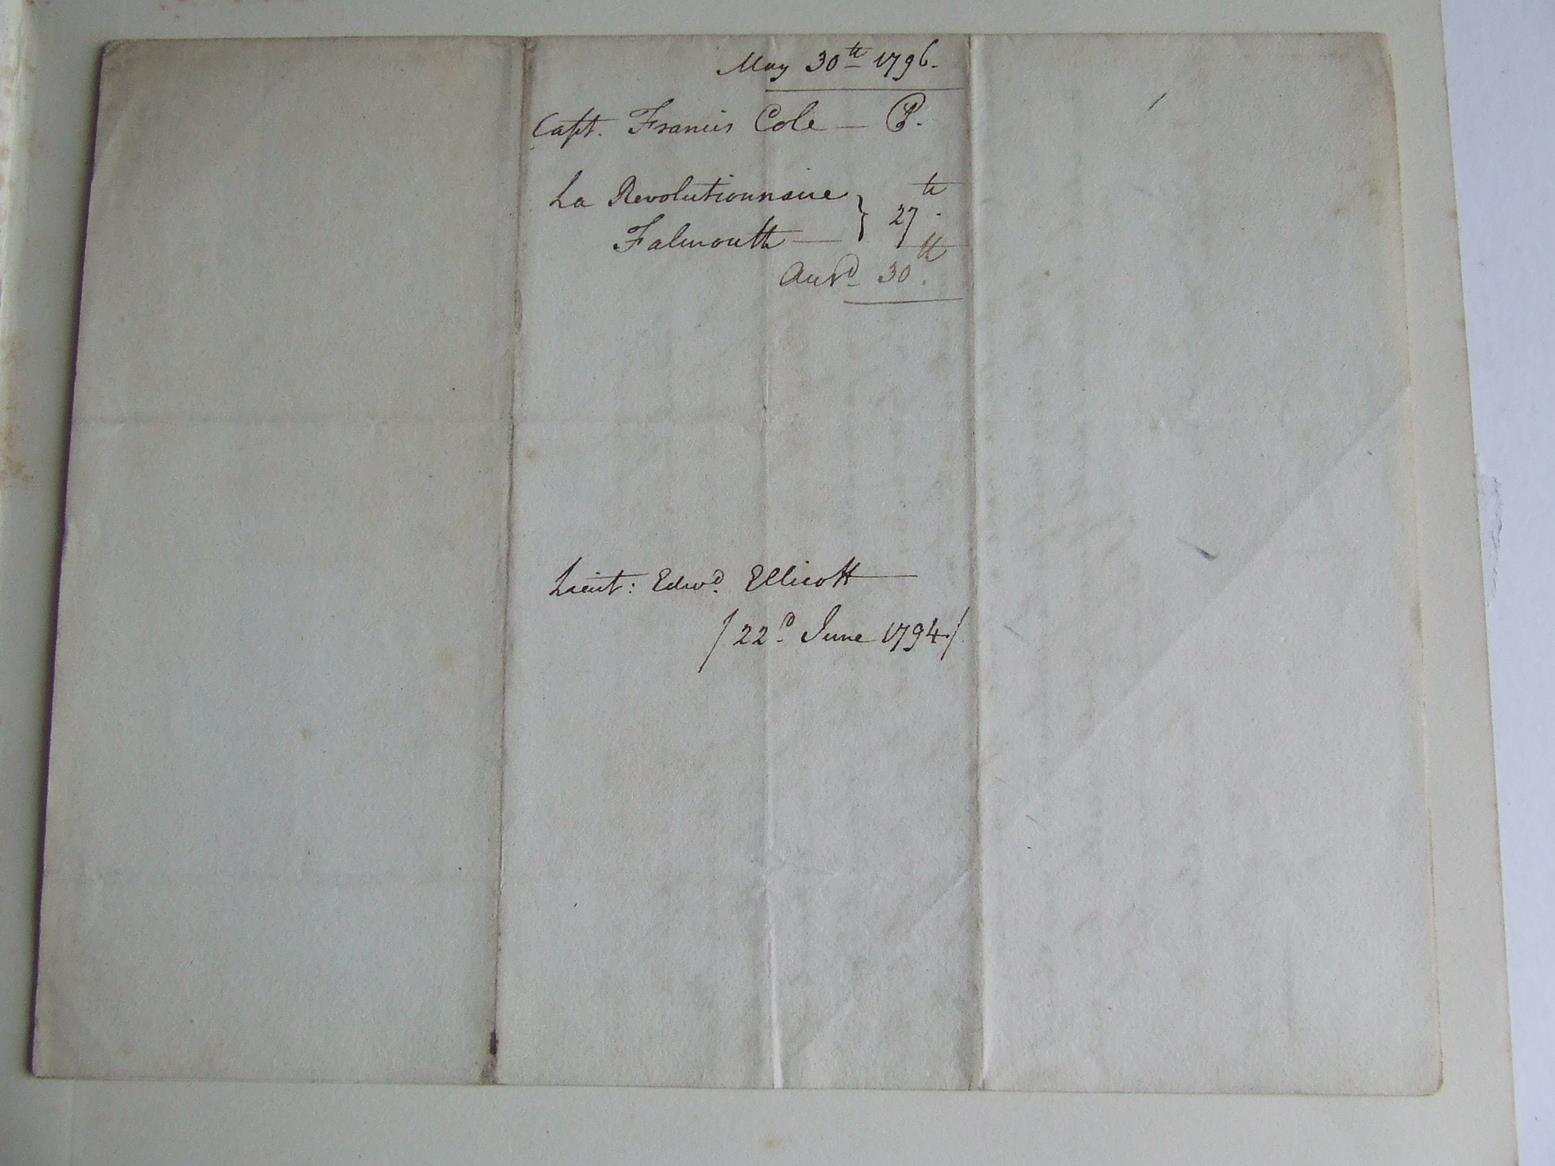 Holograph Letter from Captain Francis Cole